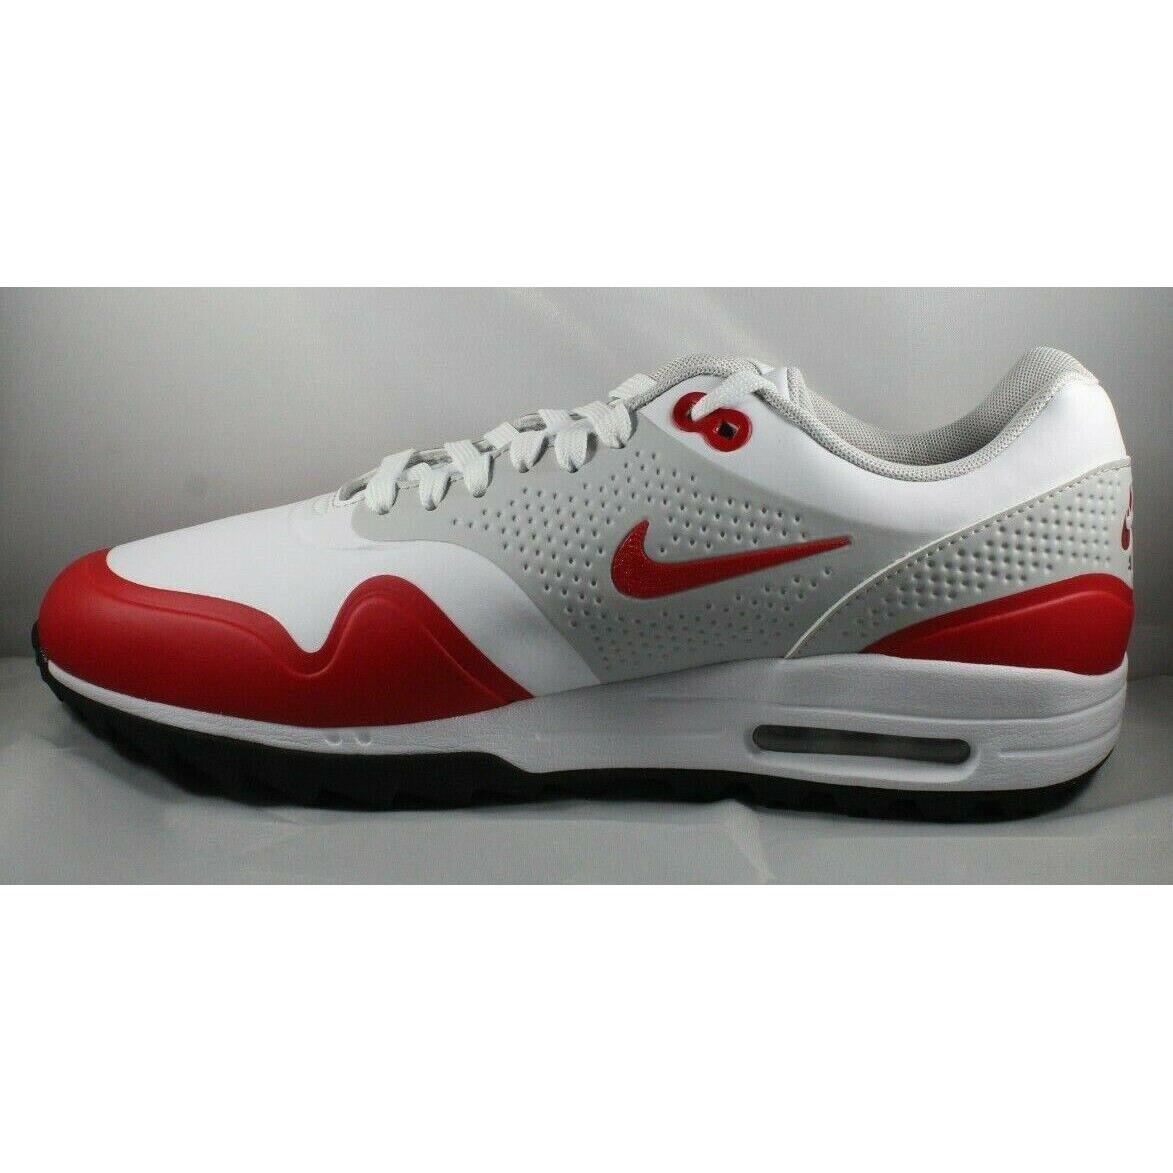 Nike shoes Air Max - Red , White/Neutral Grey/University Red/Black Manufacturer 0